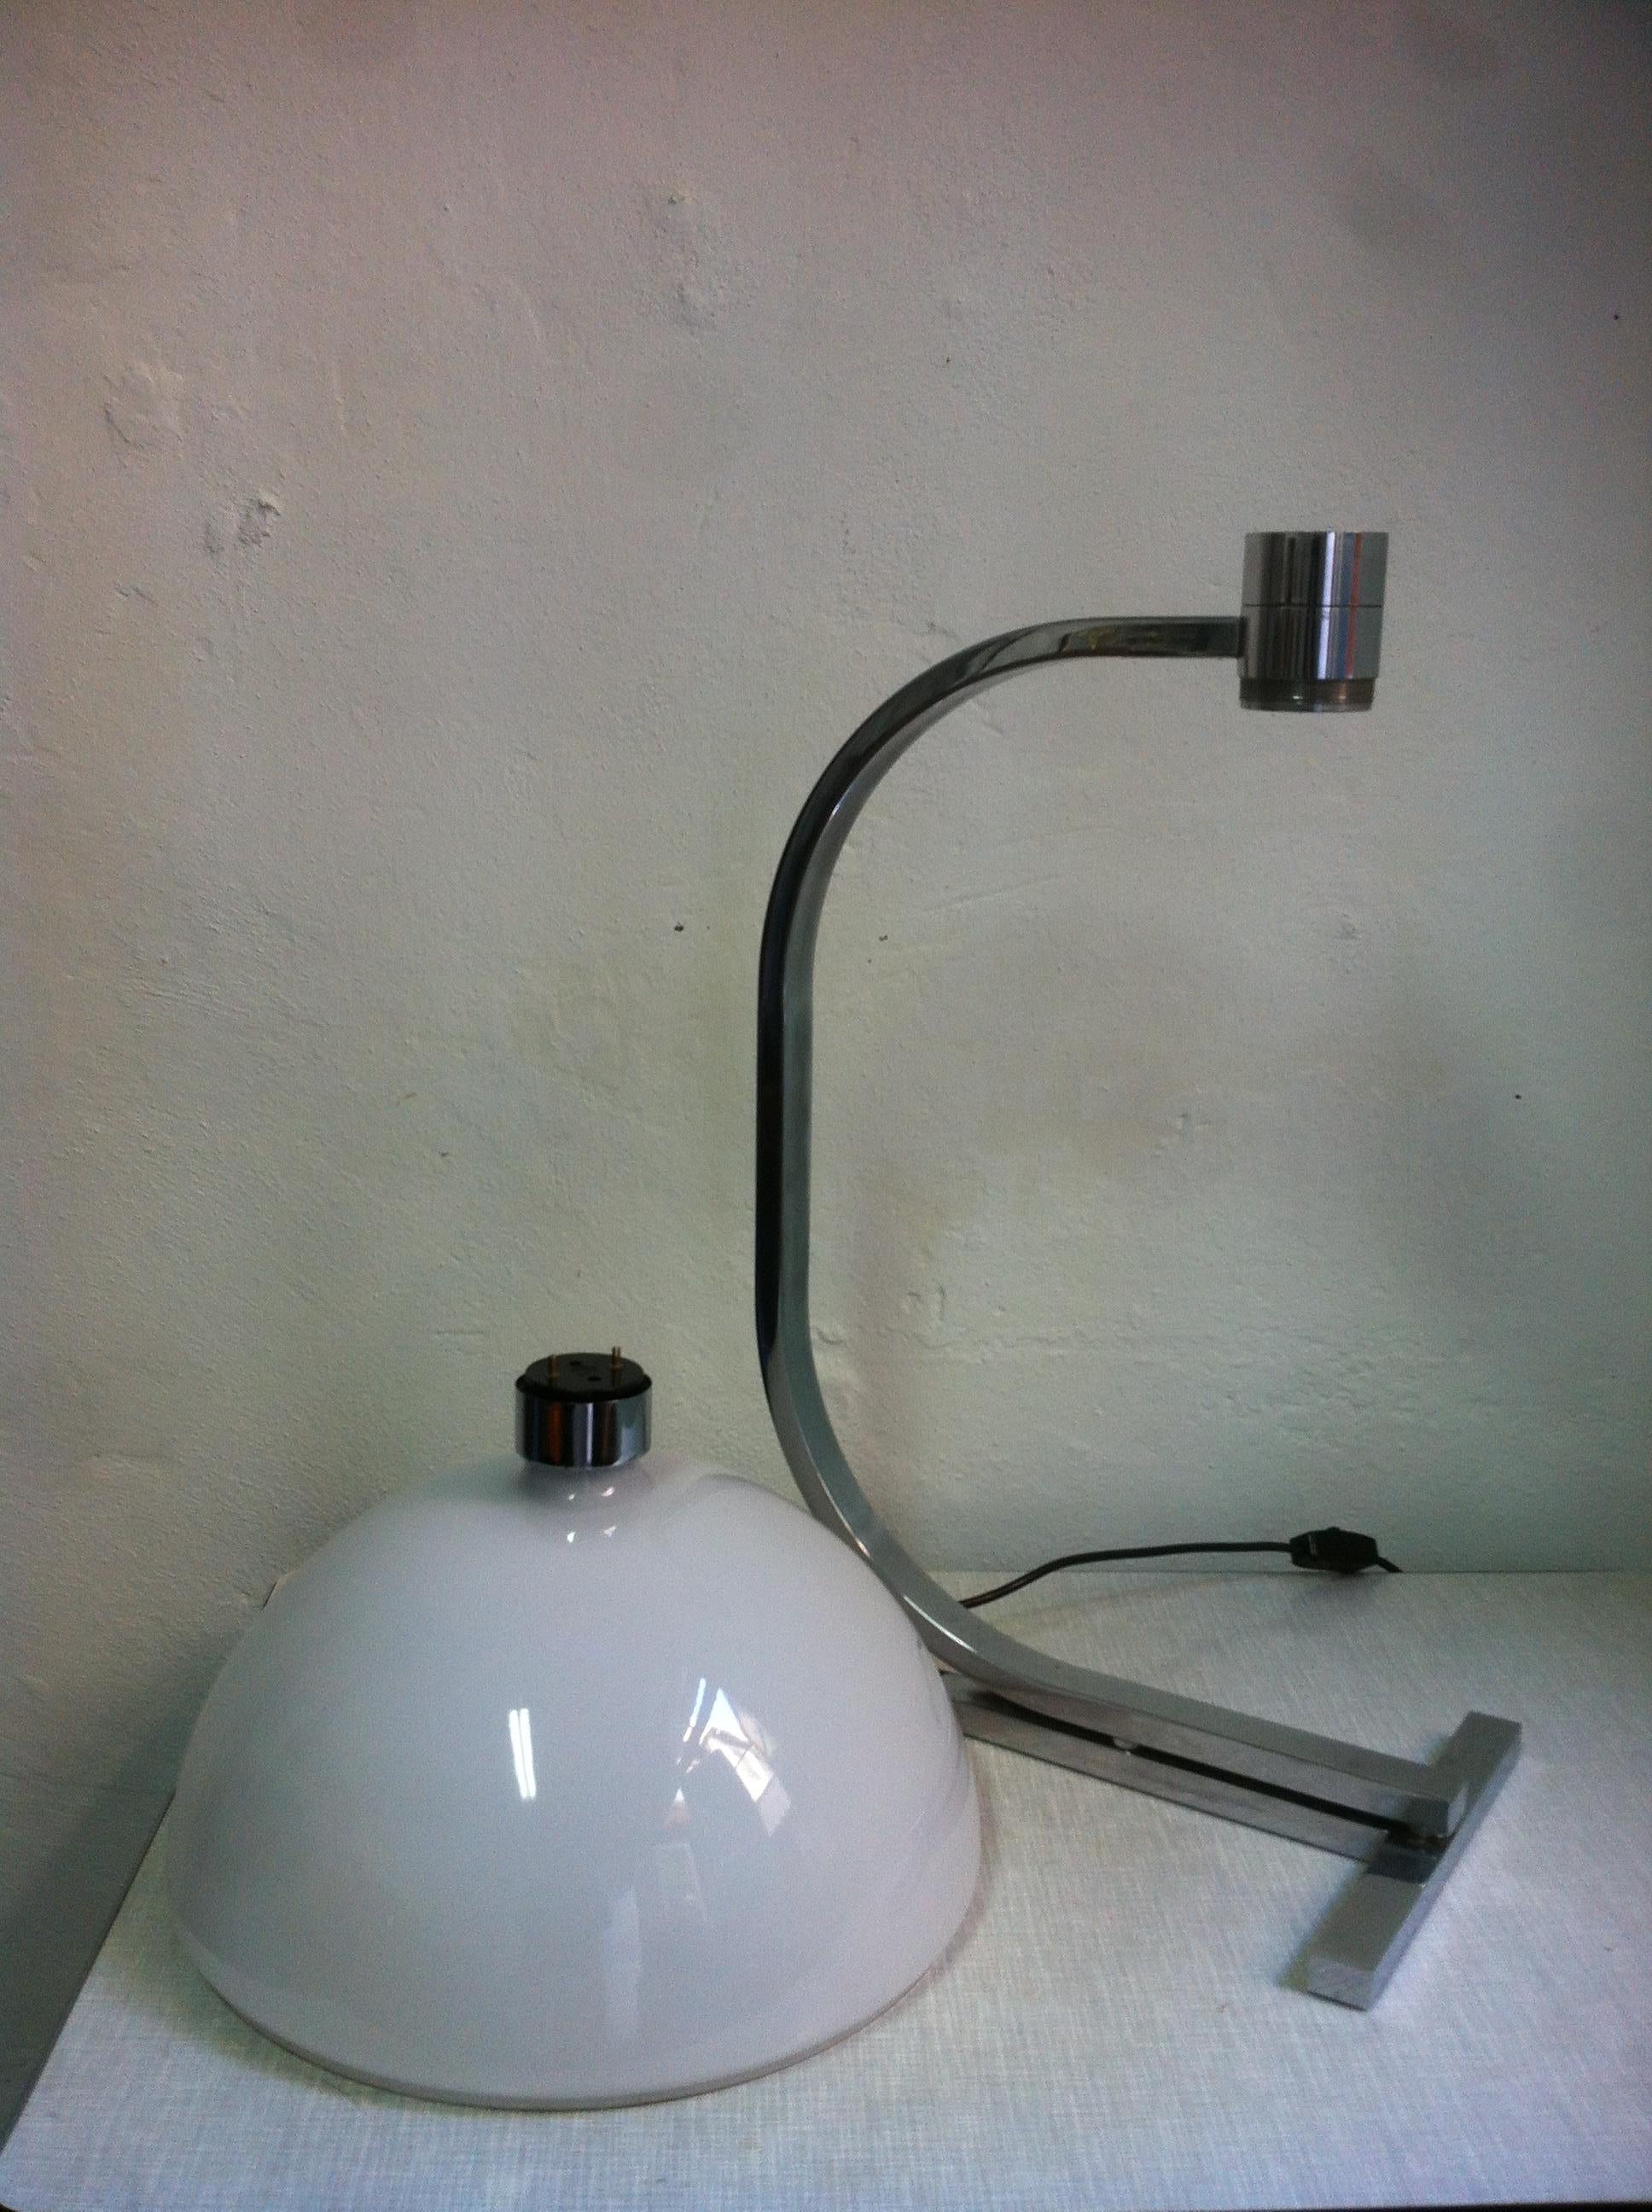 Midcentury AM/AS Table Lamp by Helg, Piva, and Albini for Sirrah Large, 1969 im Angebot 4